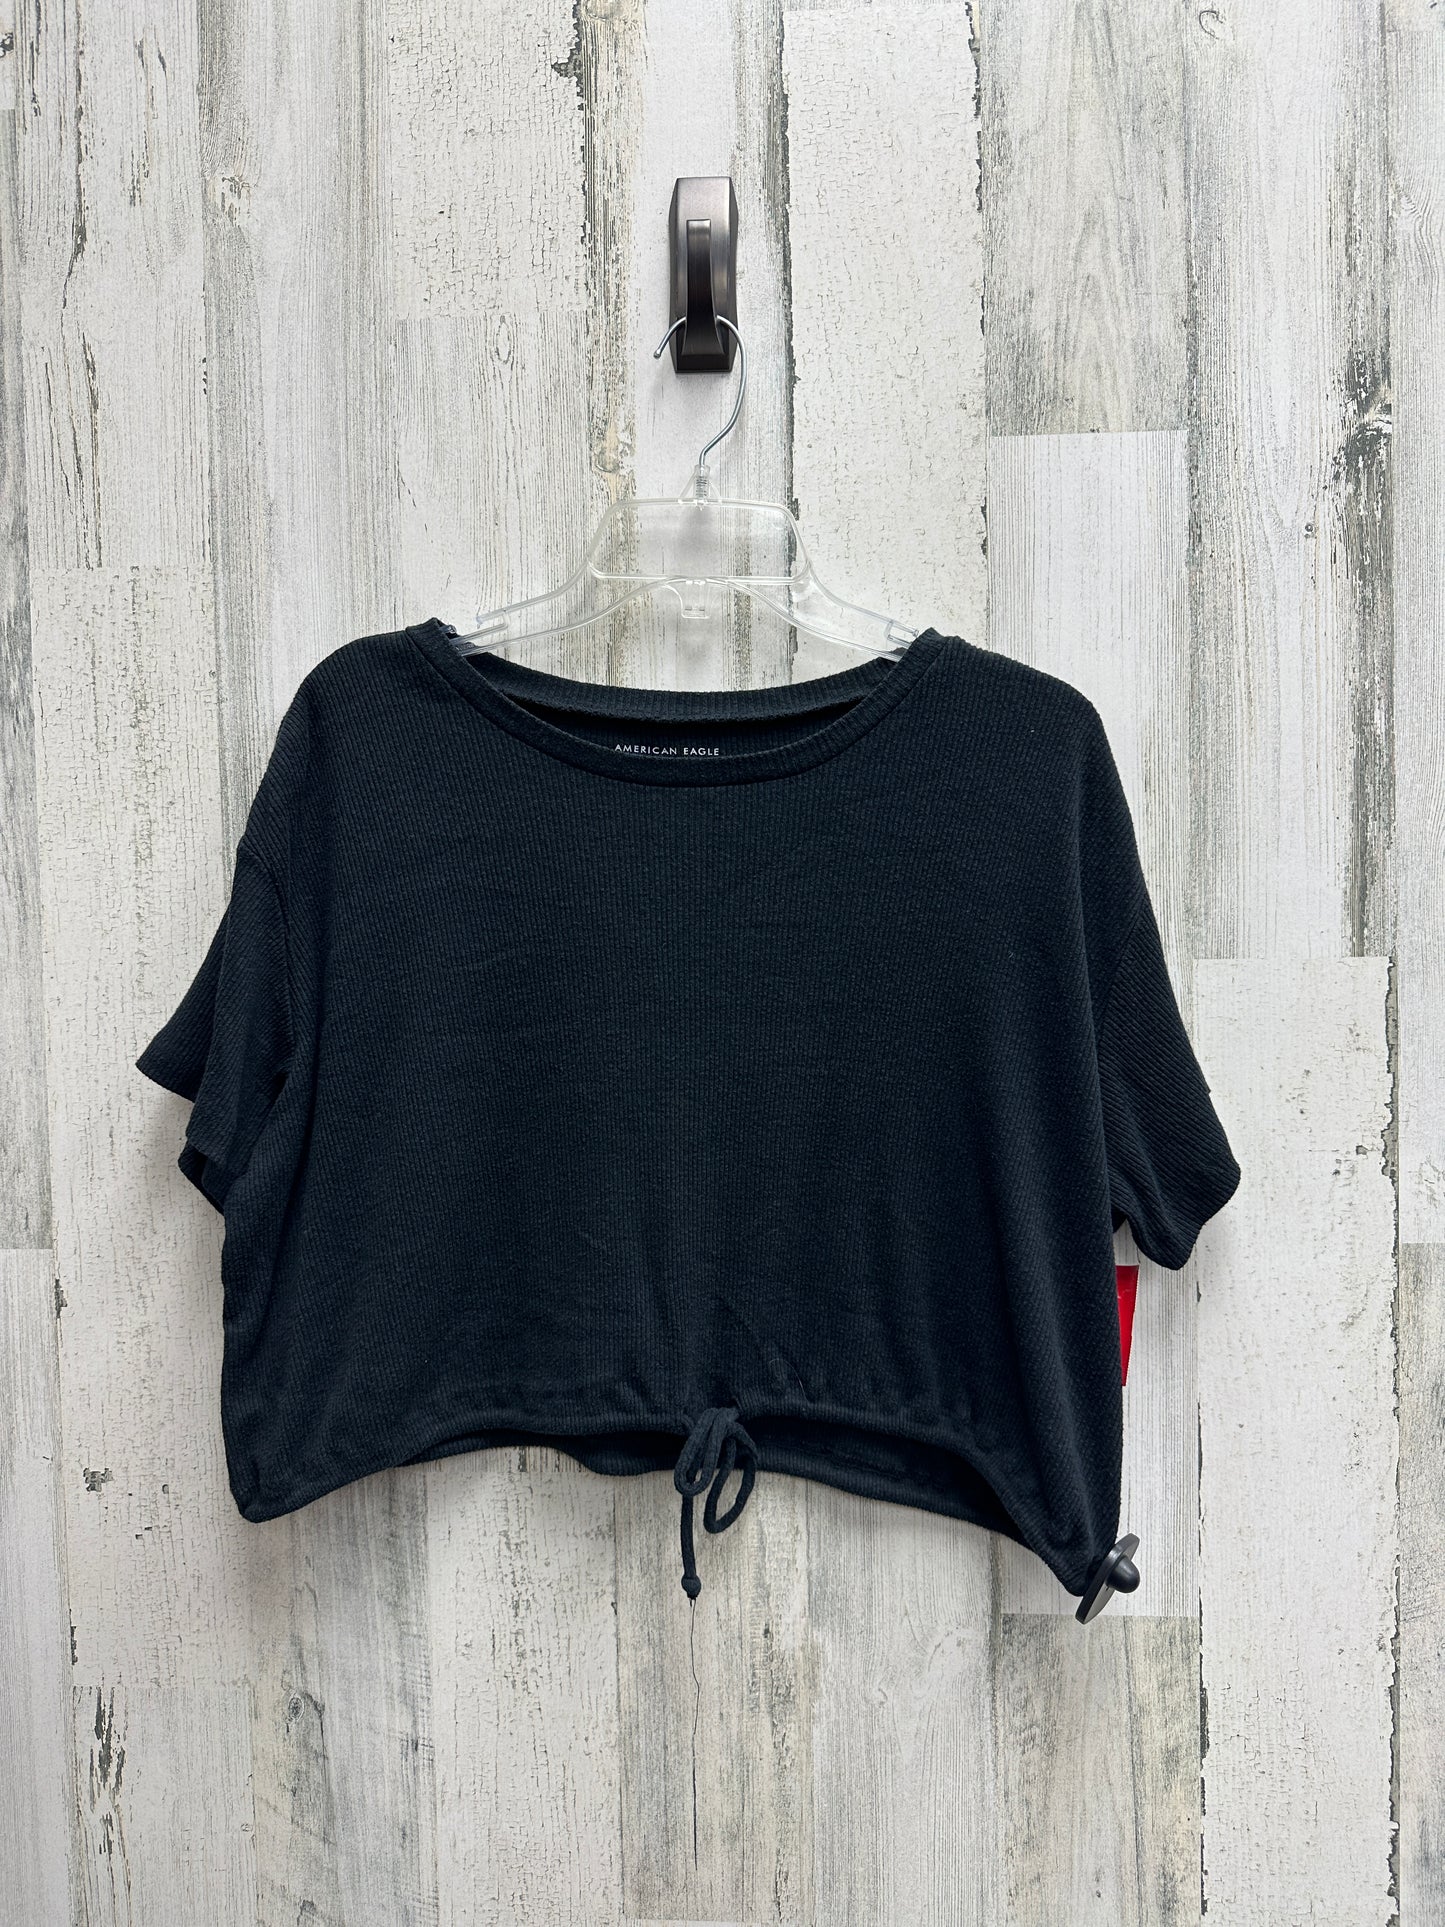 Top Short Sleeve Basic By American Eagle  Size: M